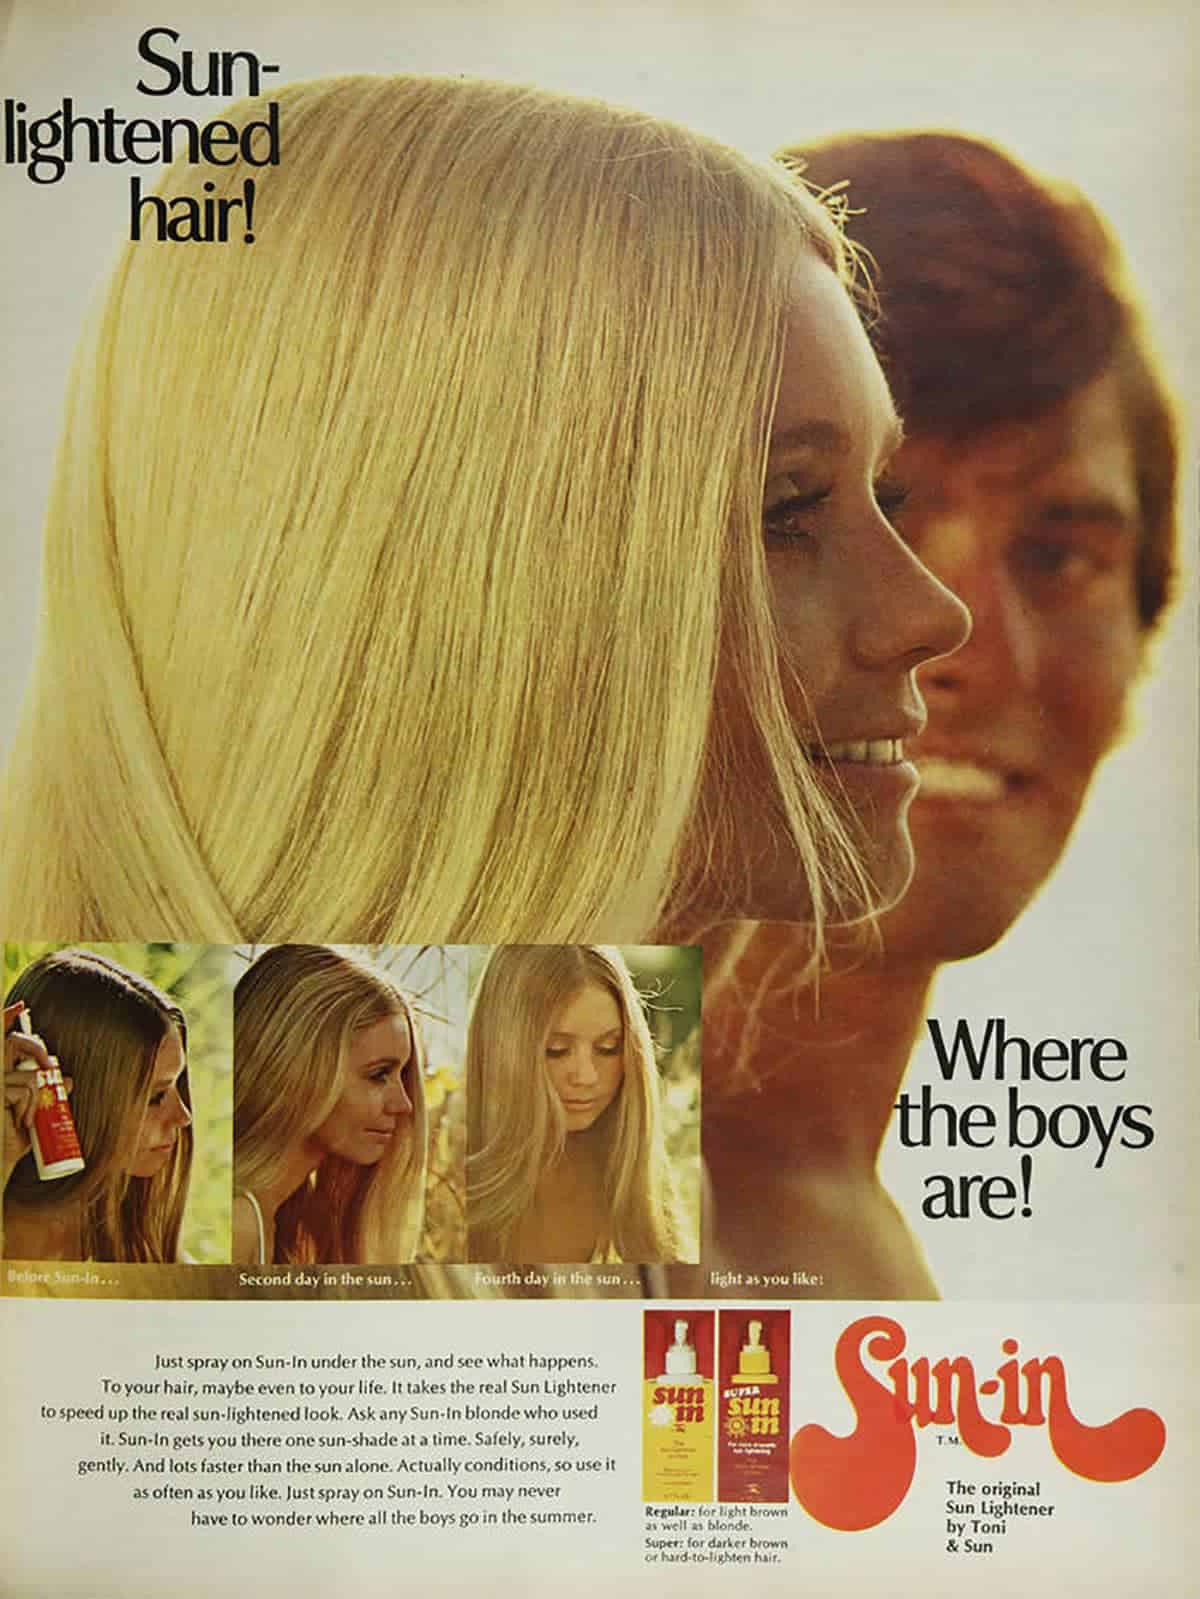 70s things - blonde hair with Sun-In